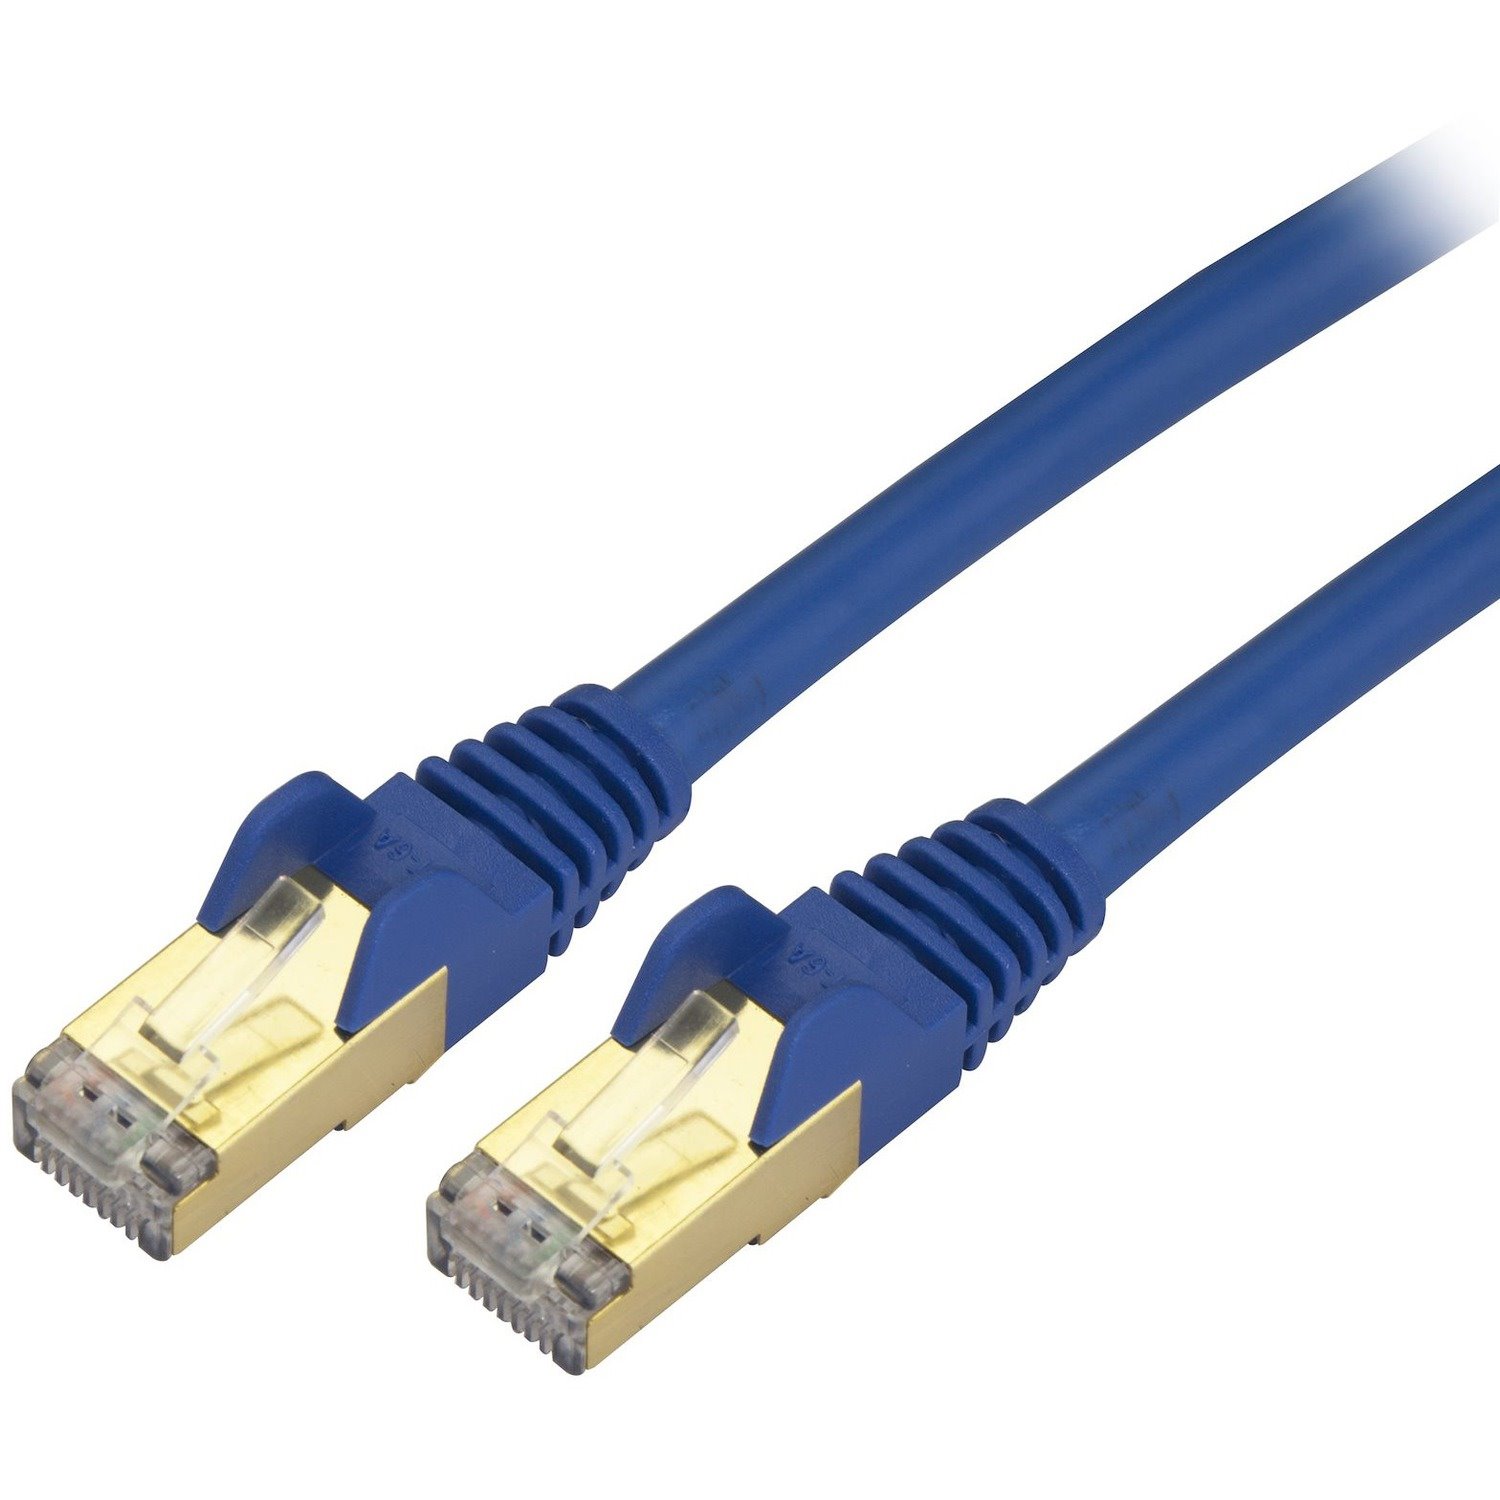 StarTech.com 6ft CAT6a Ethernet Cable - 10 Gigabit Category 6a Shielded Snagless 100W PoE Patch Cord - 10GbE Blue UL Certified Wiring/TIA